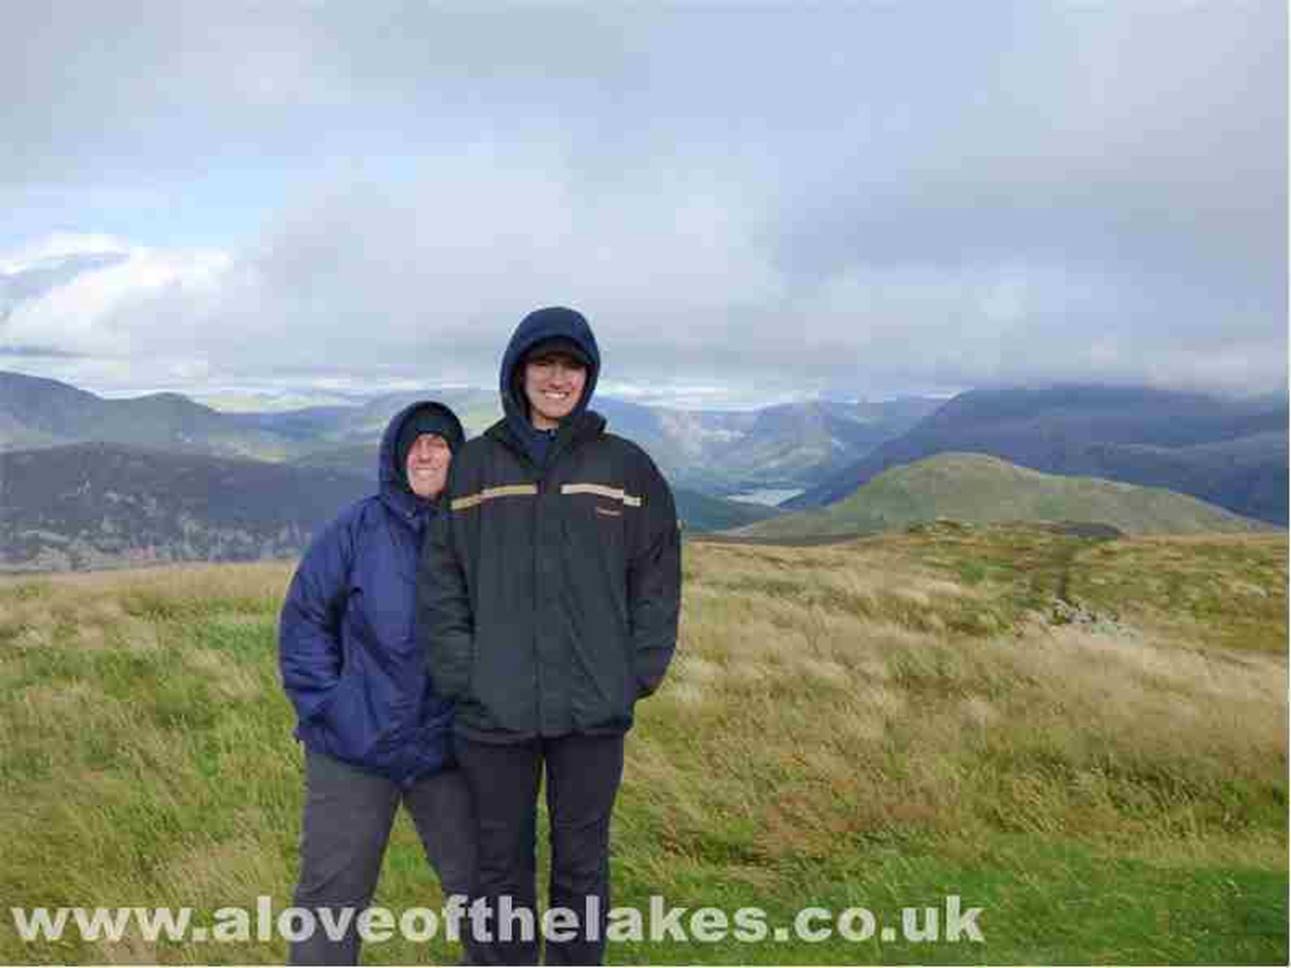 Awoken from their slumbers  This really is one of the more comfortable summits that you will encounter on a Wainwright walk